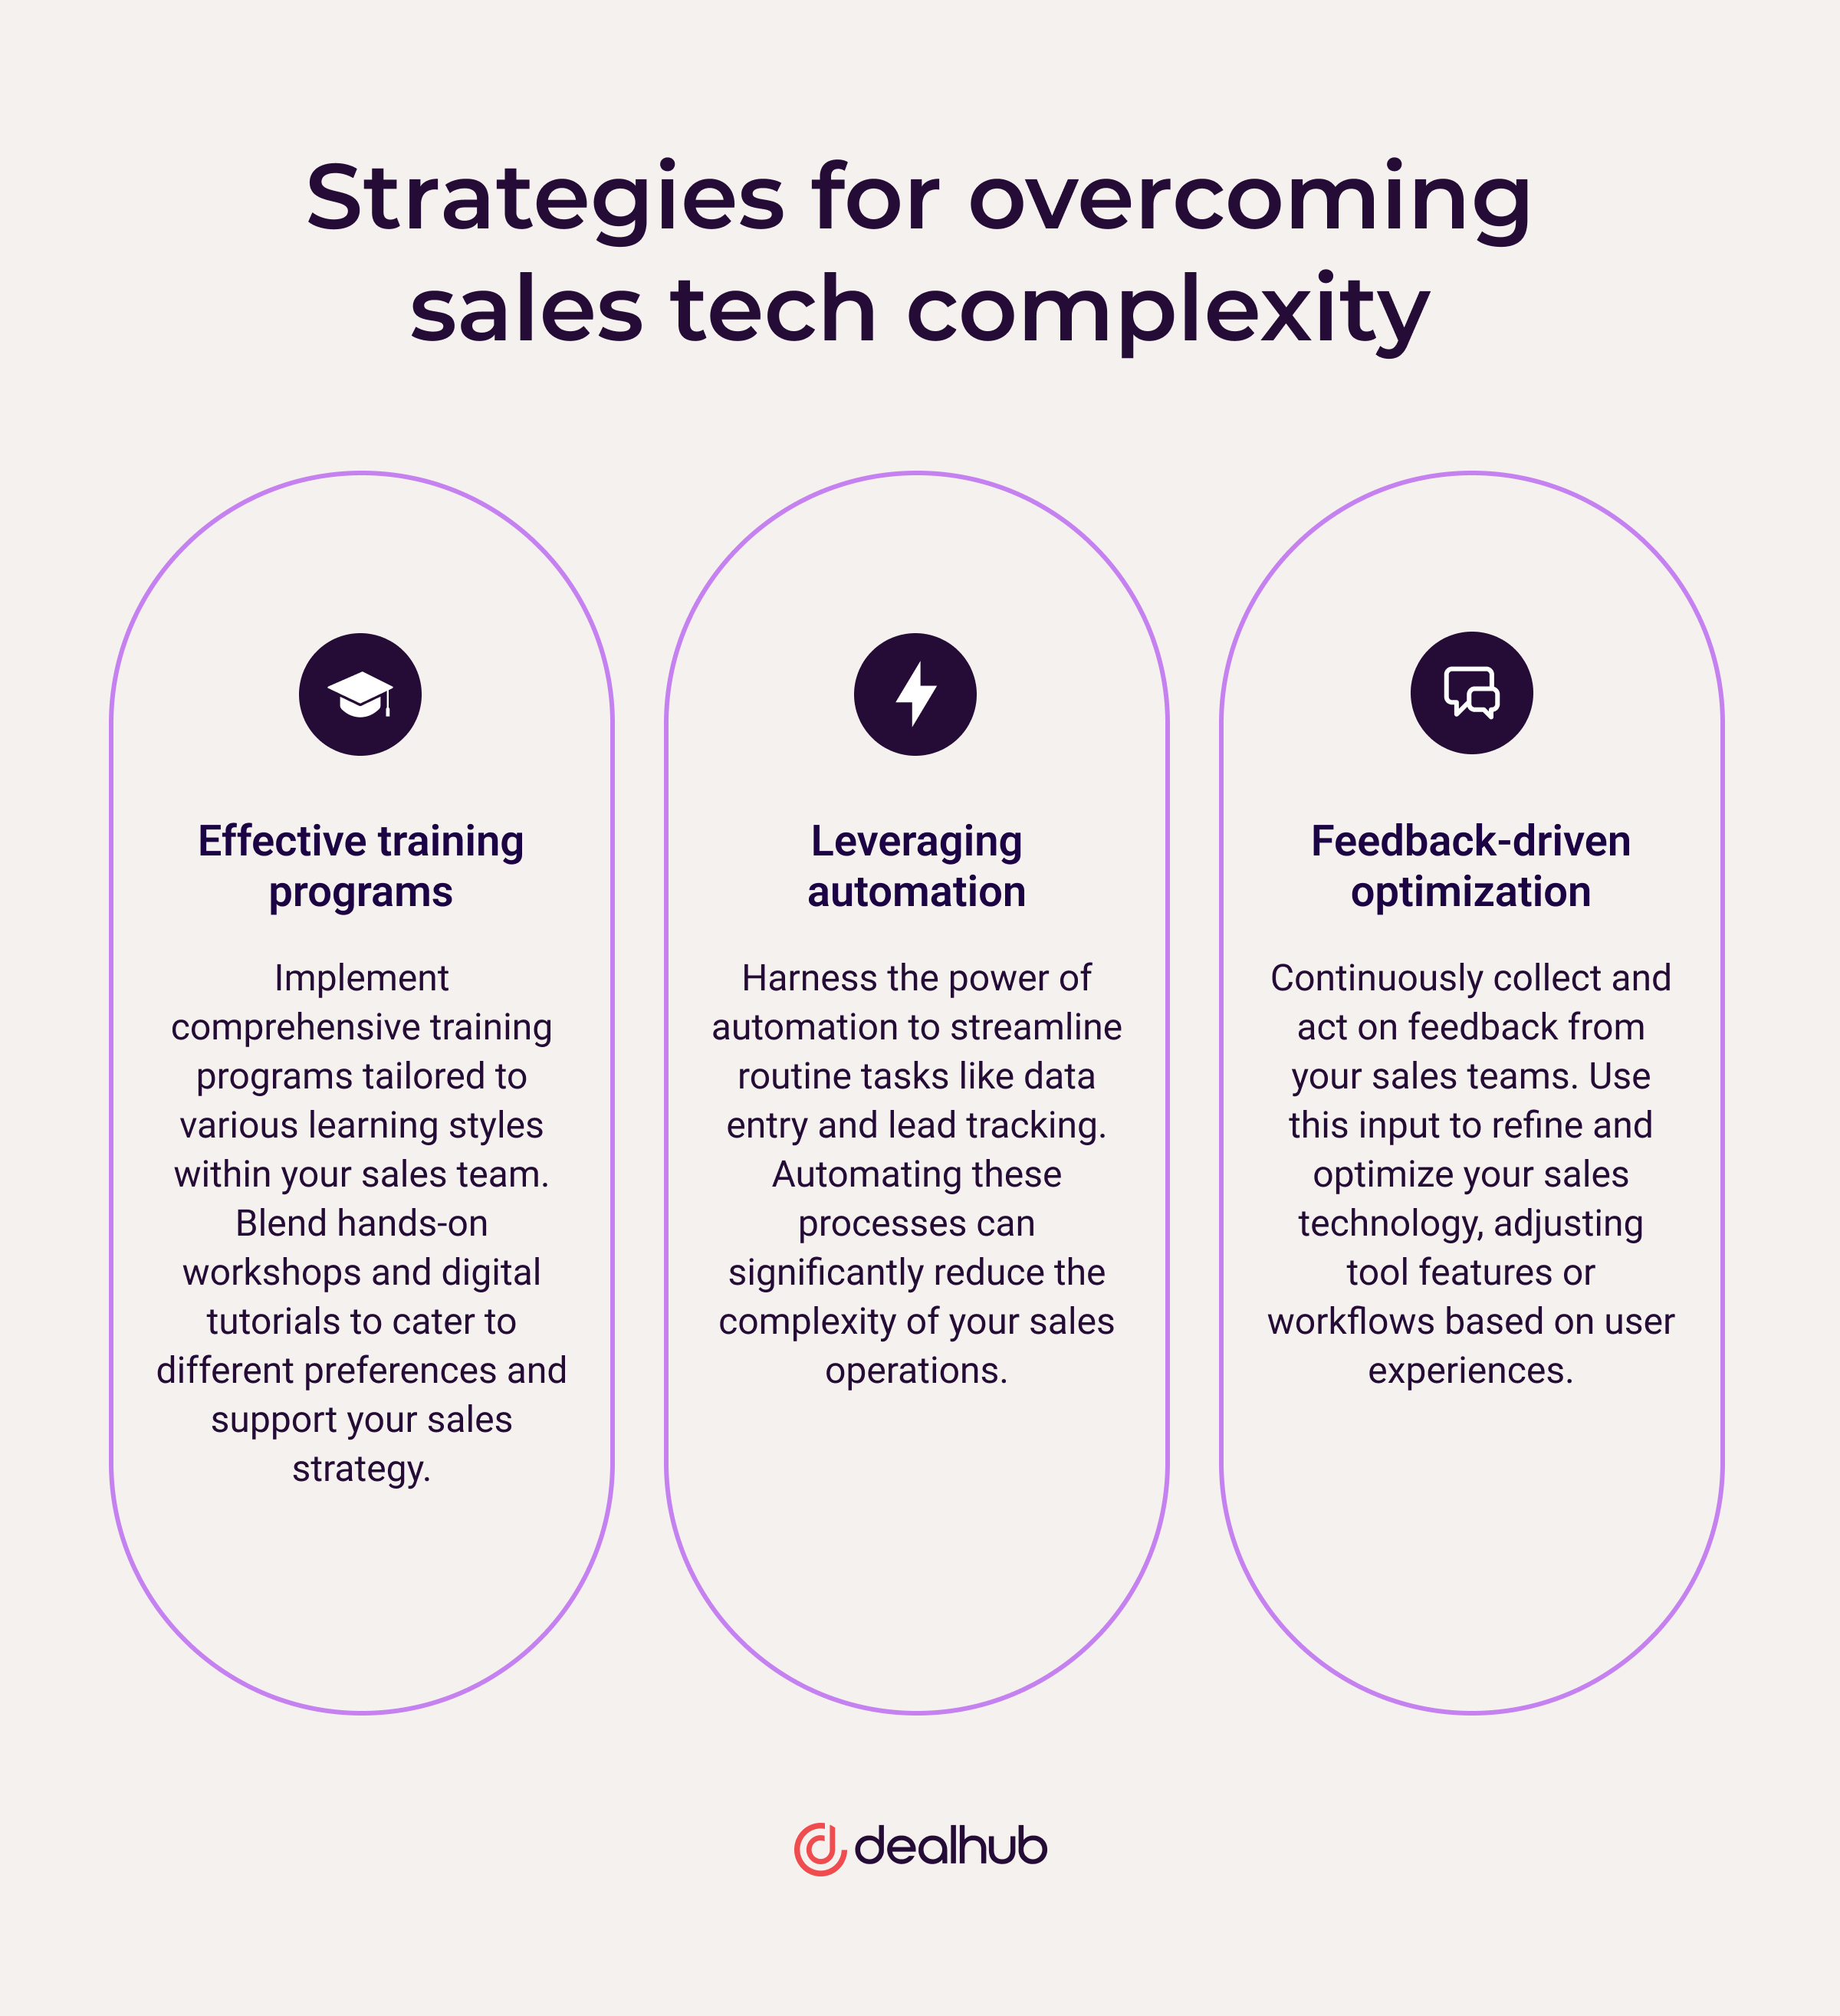 Strategies for overcoming sales tech complexity